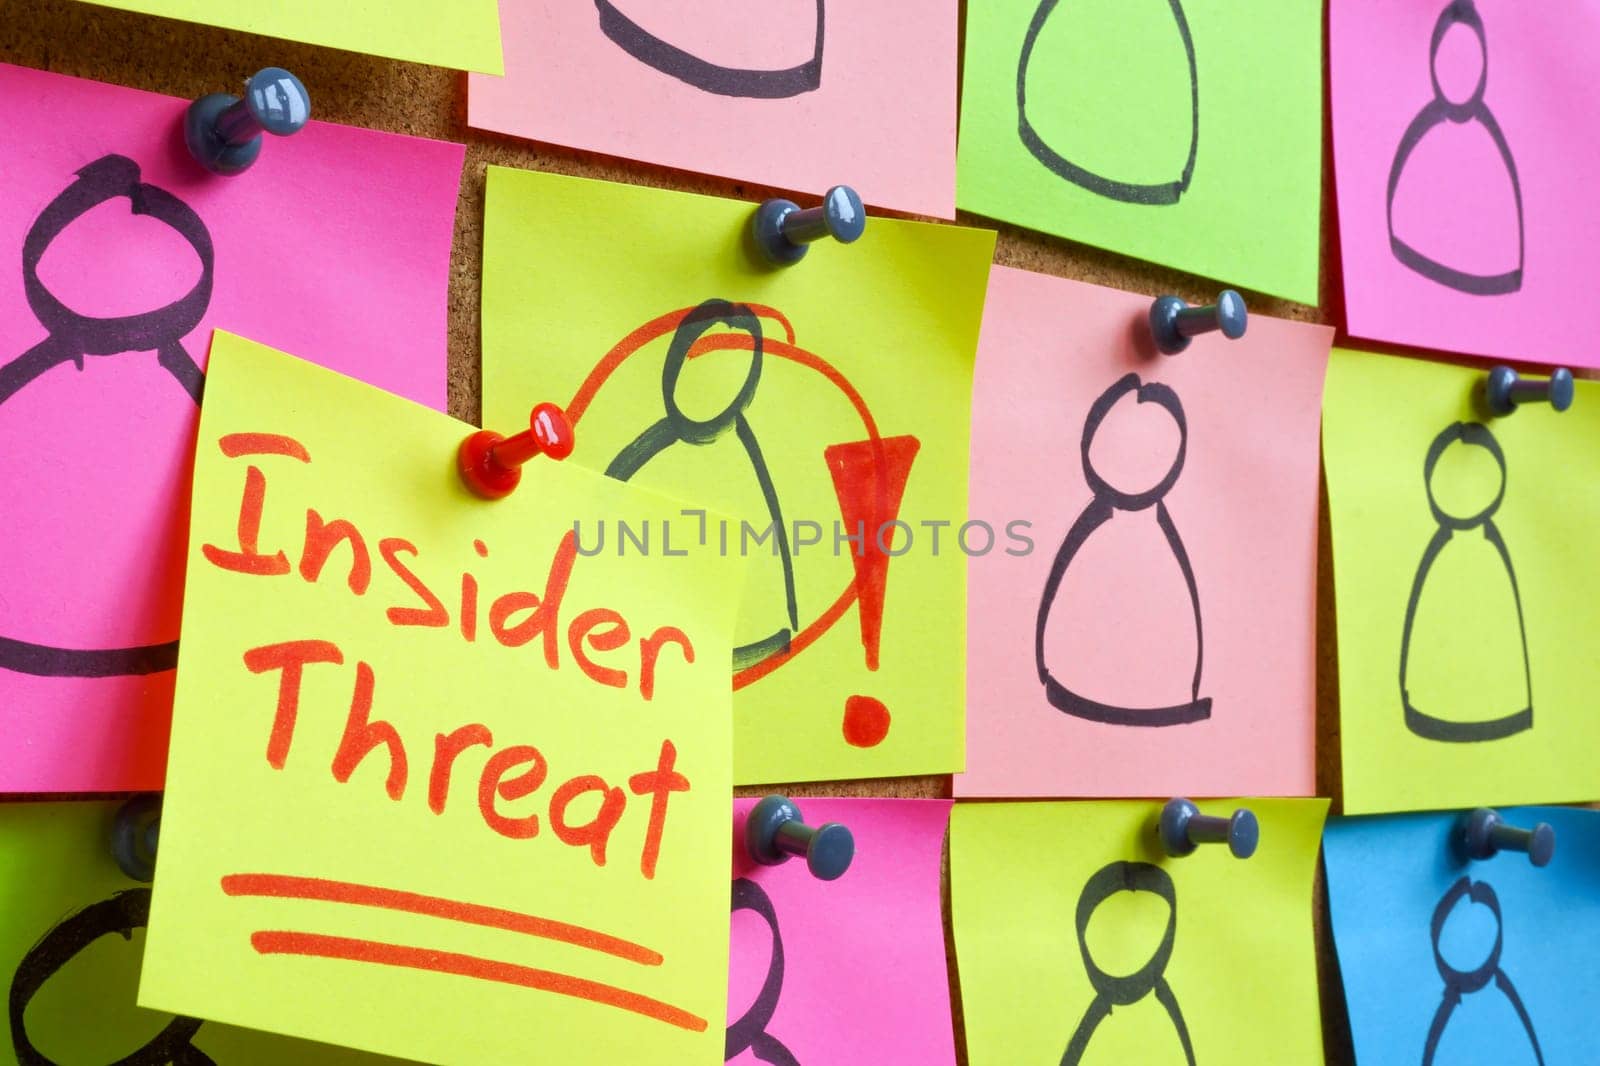 Pinned figures and a sticker with the words insider threat. by designer491